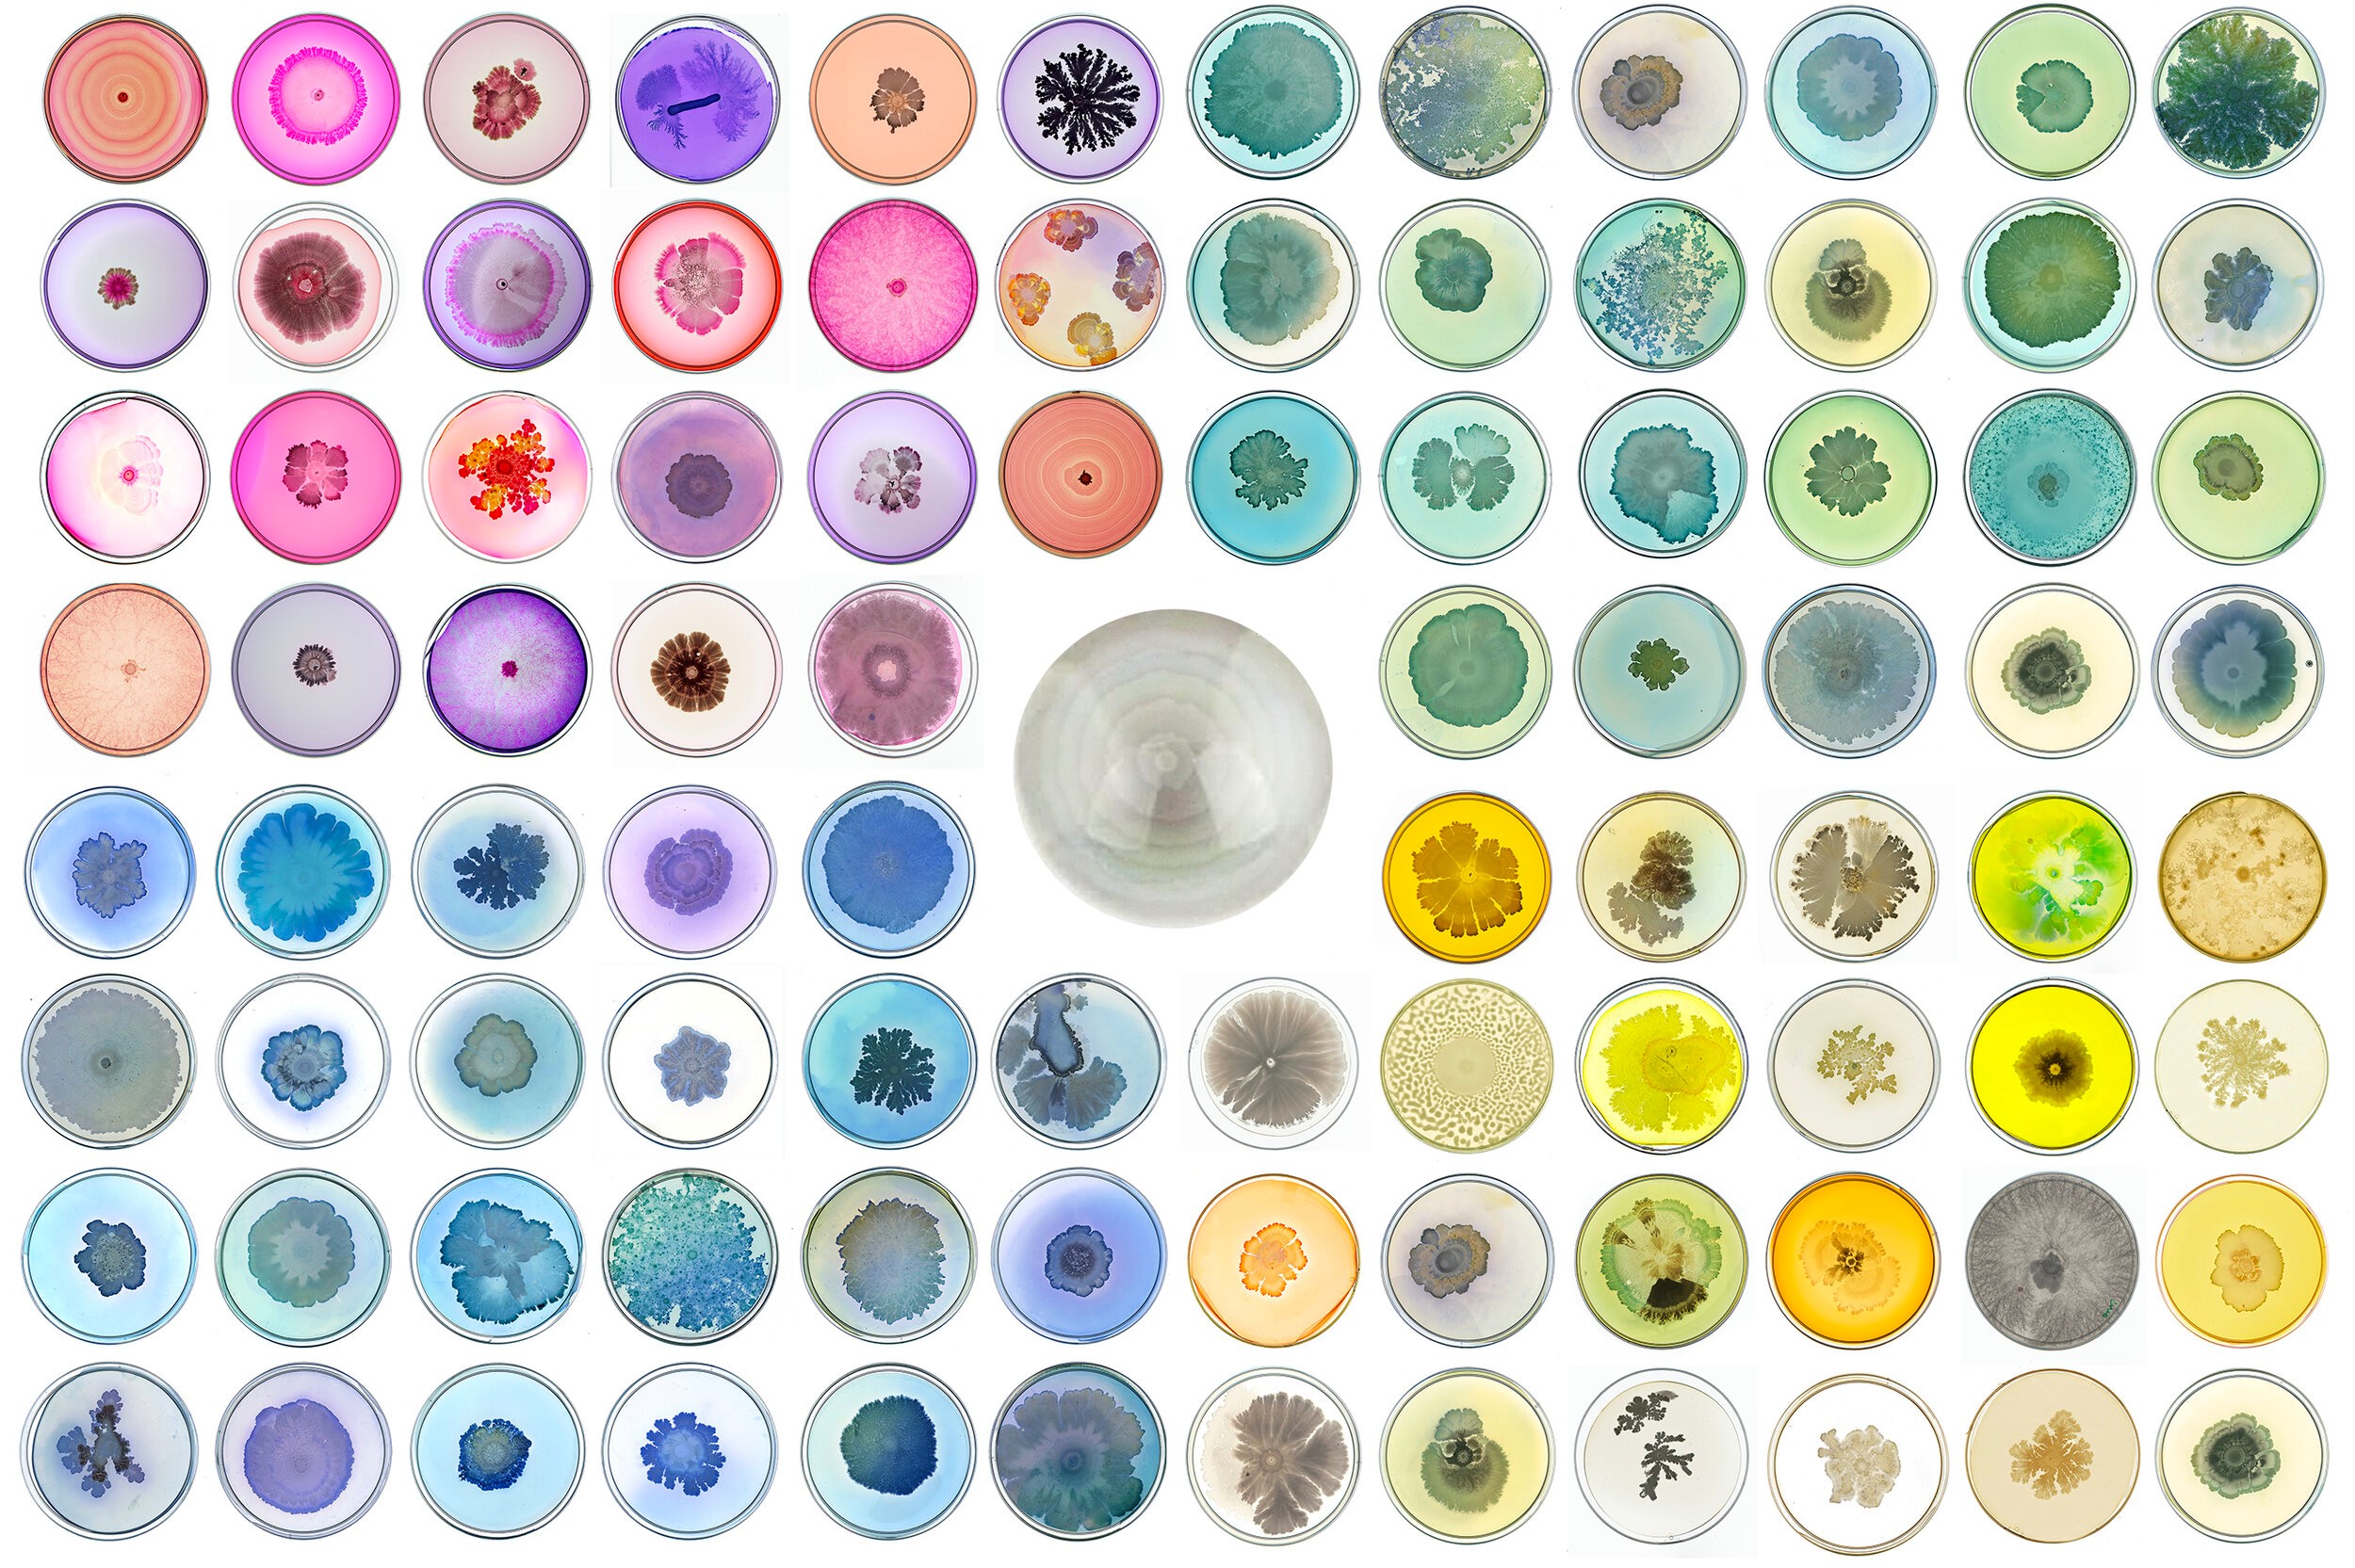 Colorful and artistic arrangement of cells